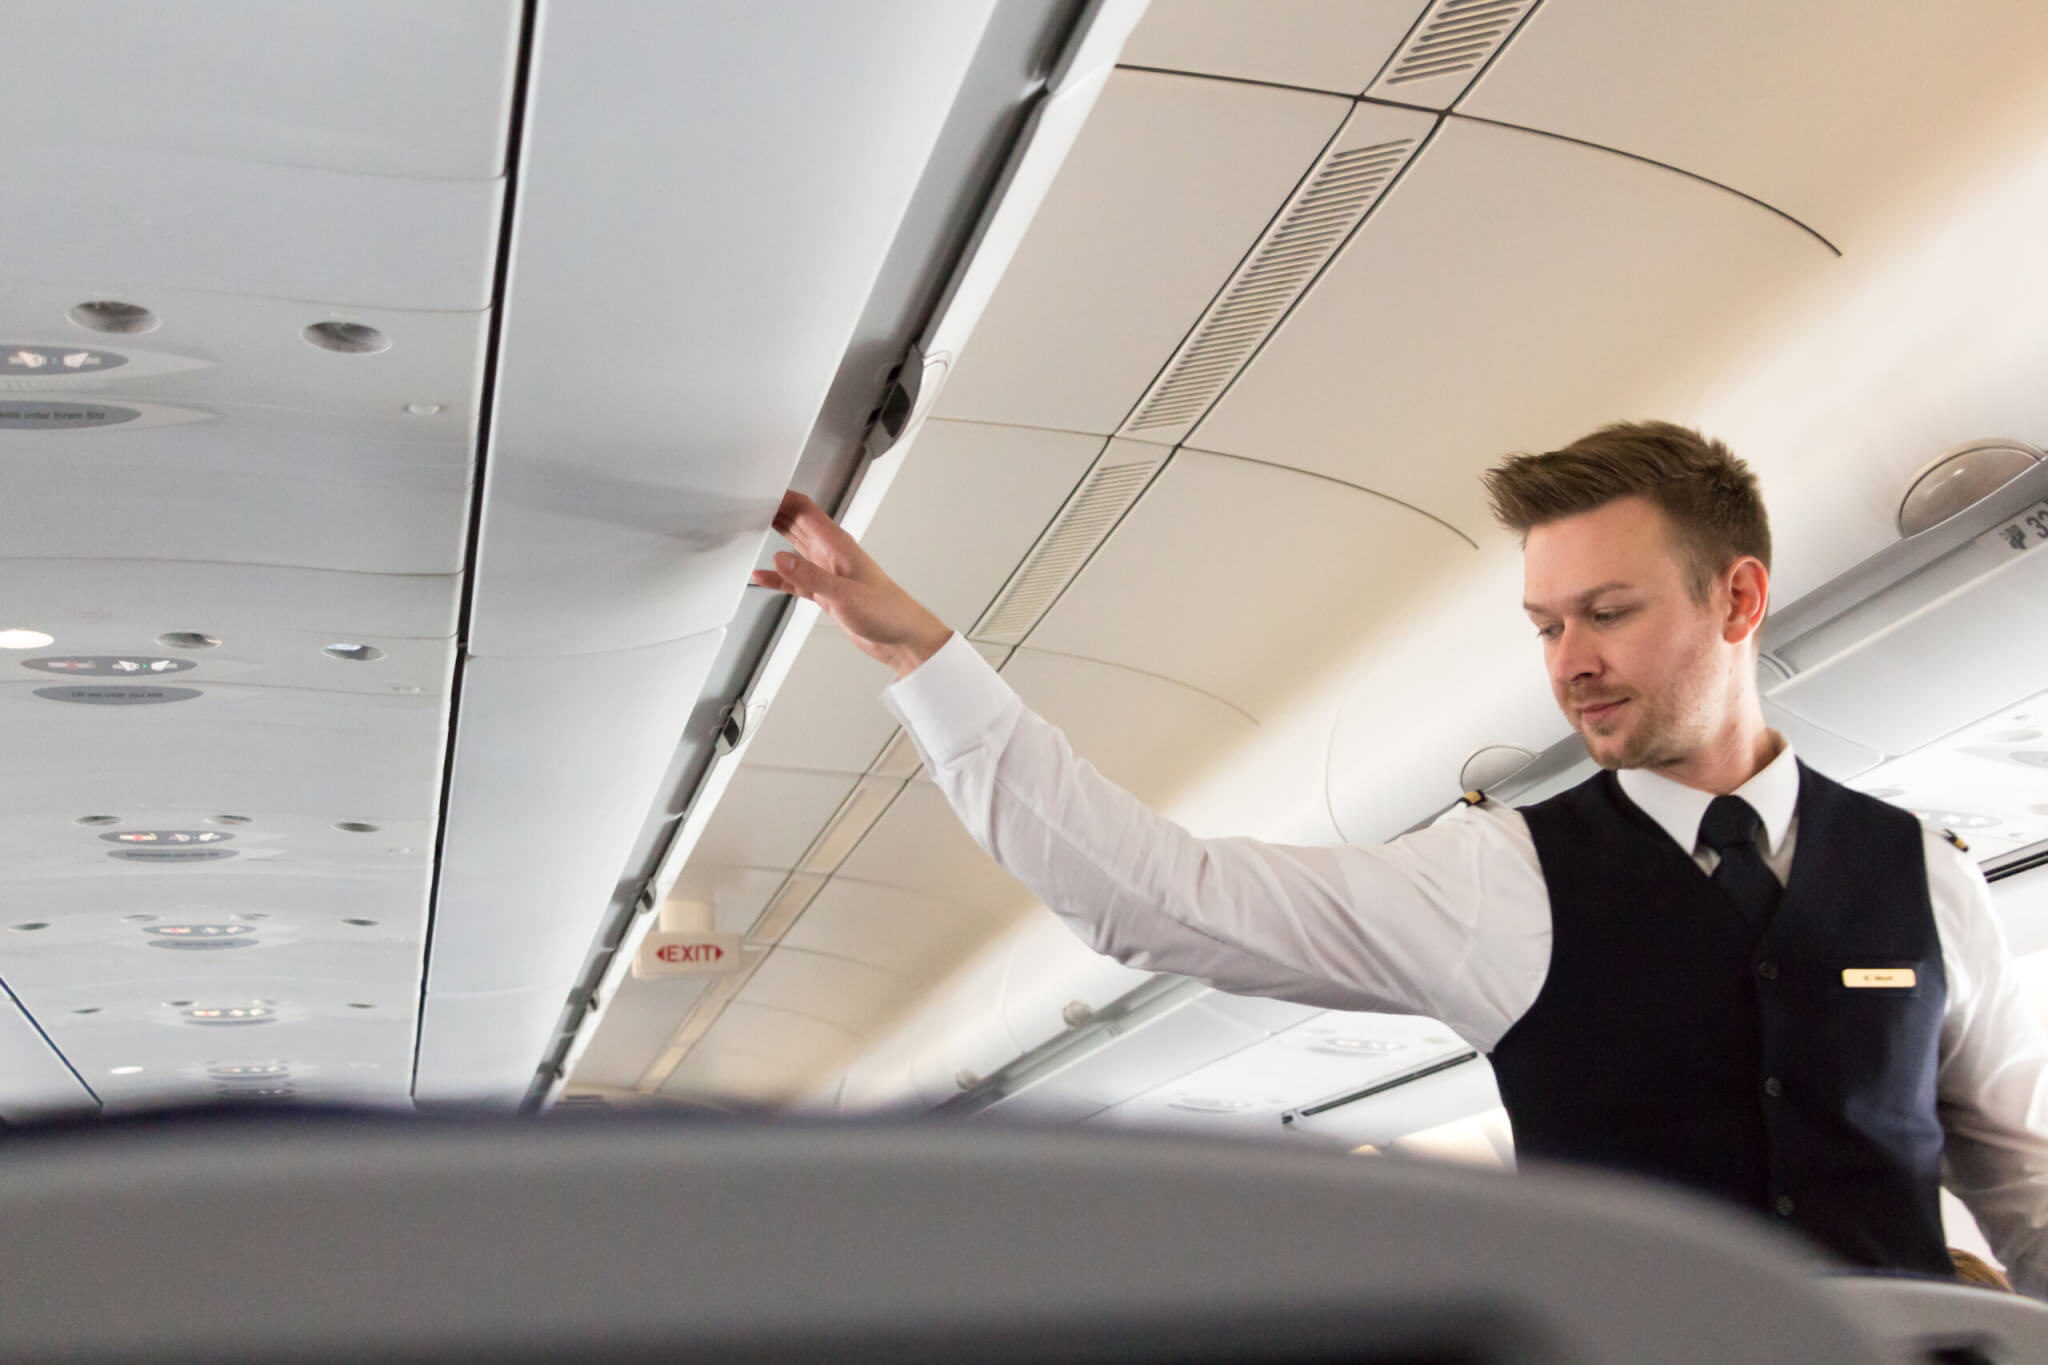 Flight attendant checking overhead compartments on airplane